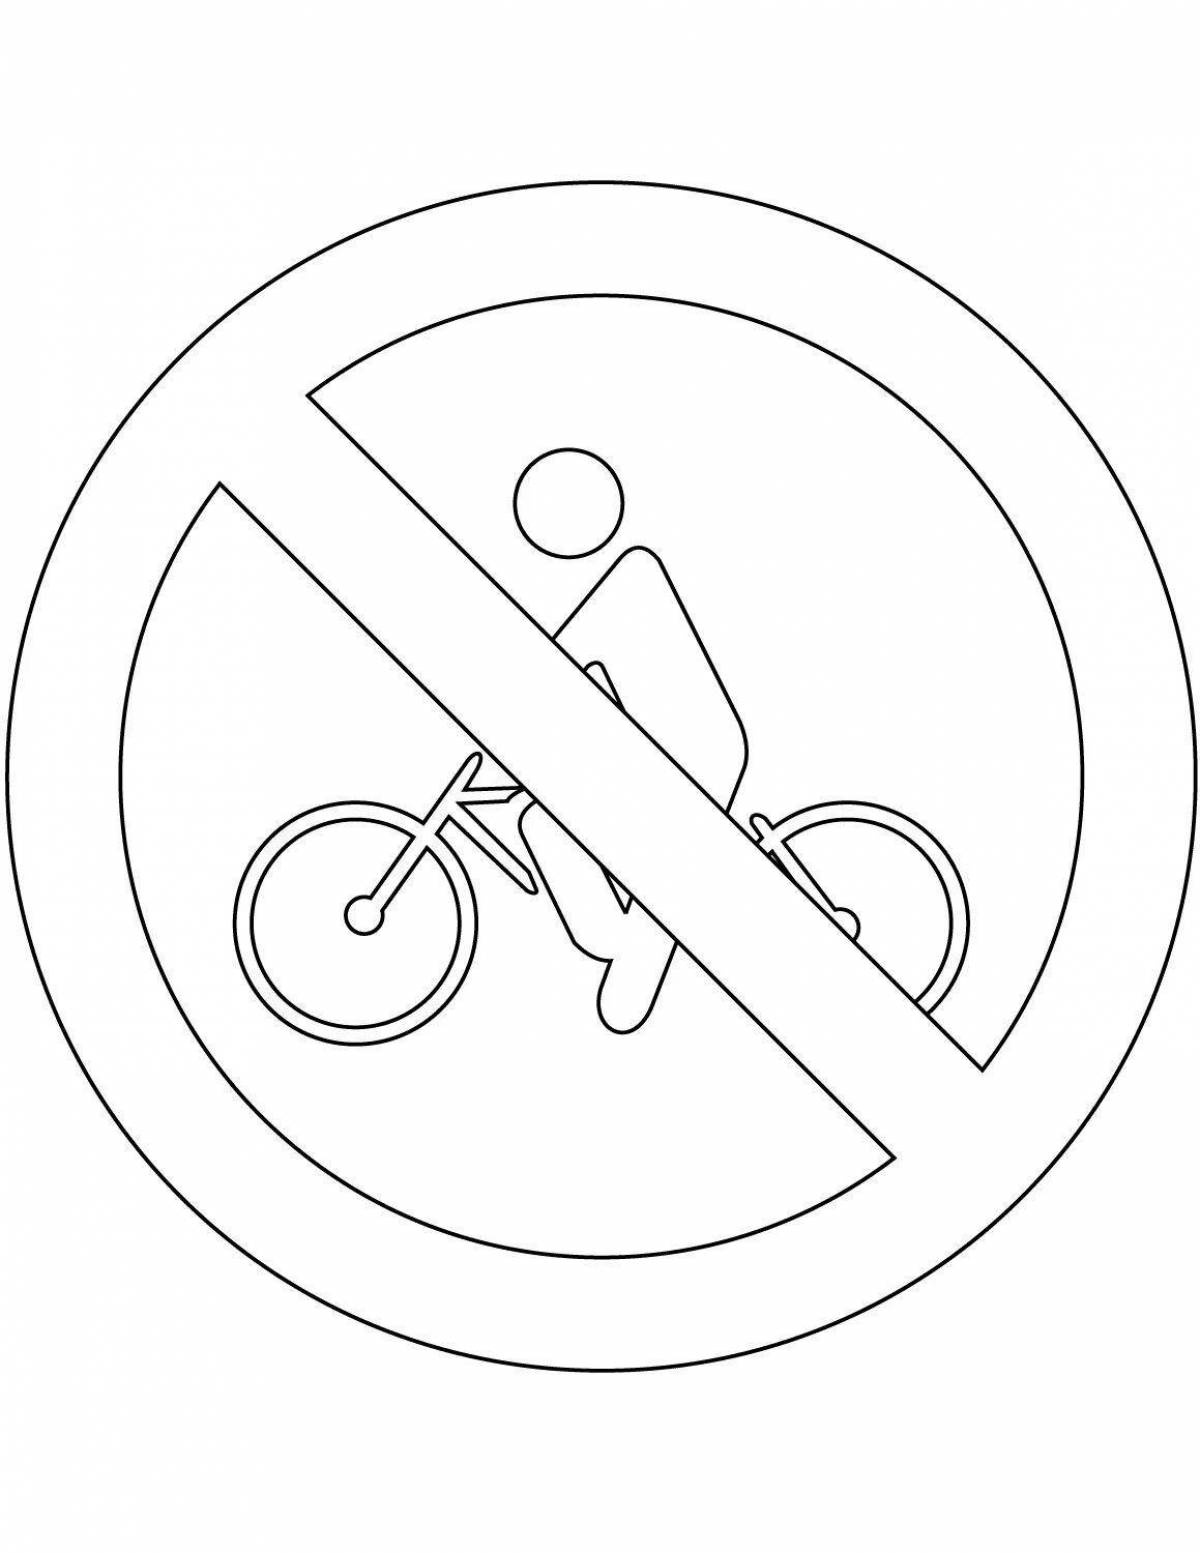 Coloring page glowing no entry sign